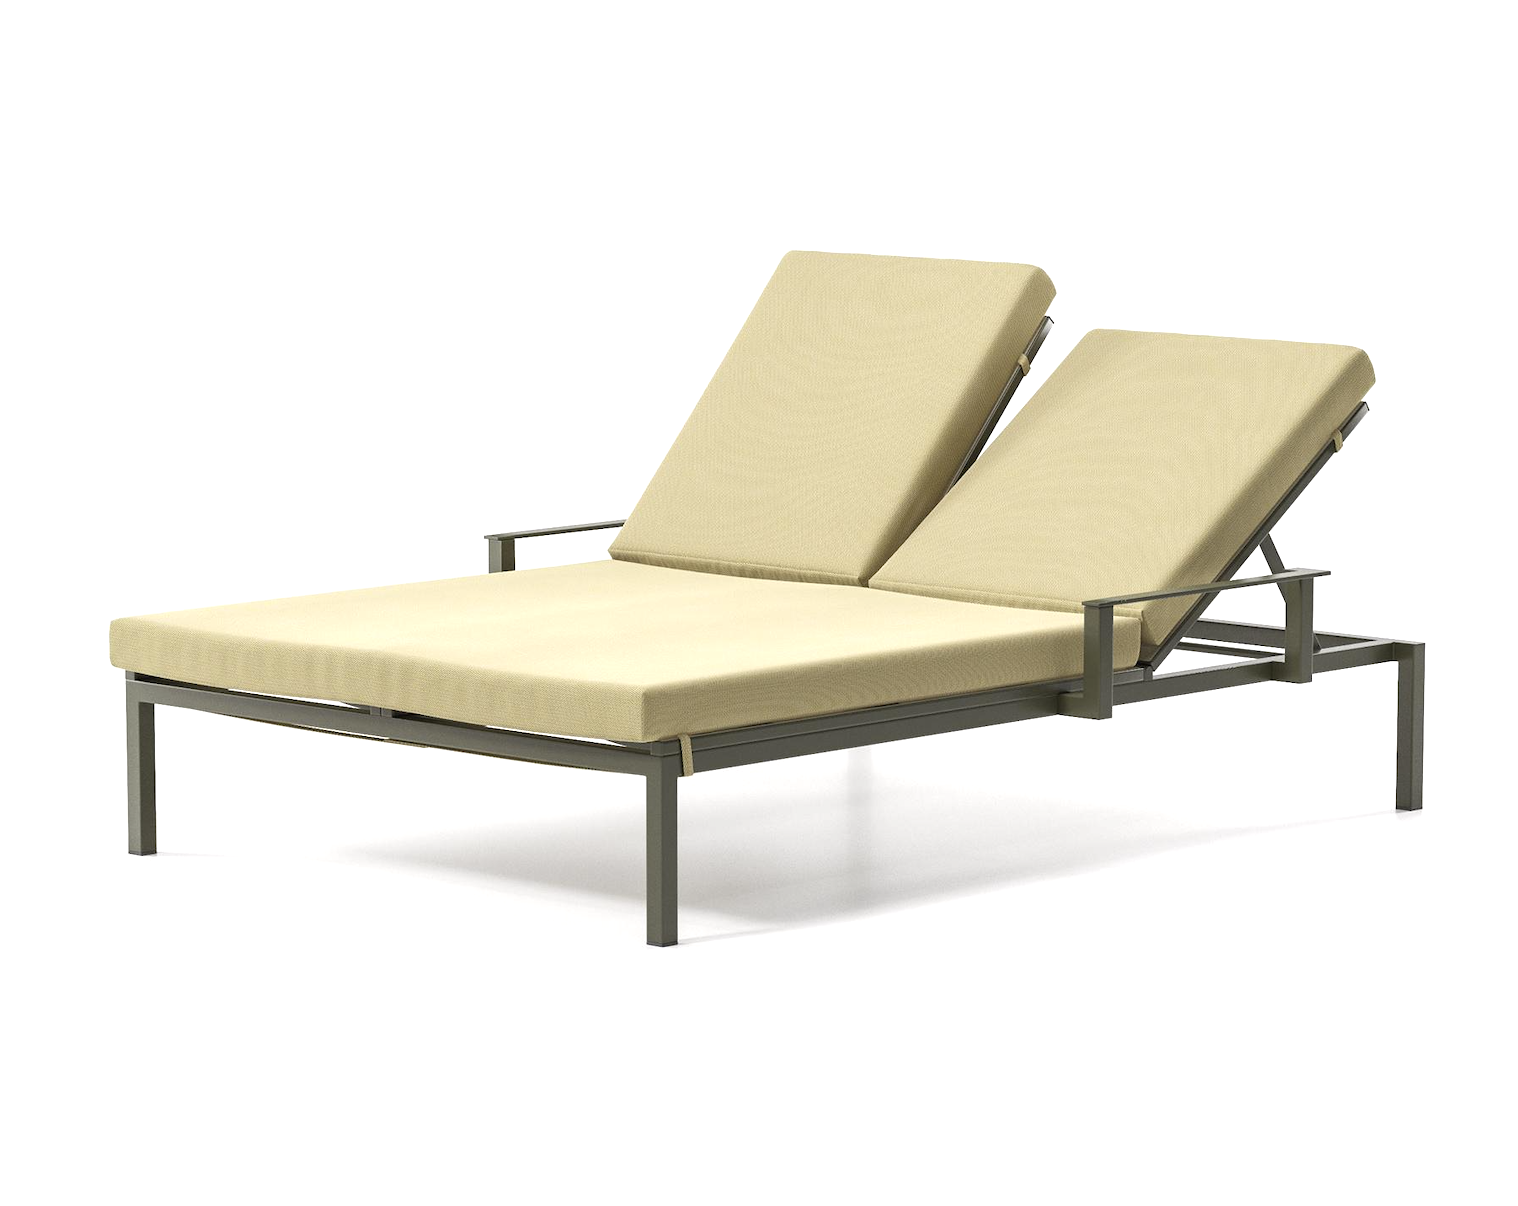 Product Image landscape via double sunlounger with arms